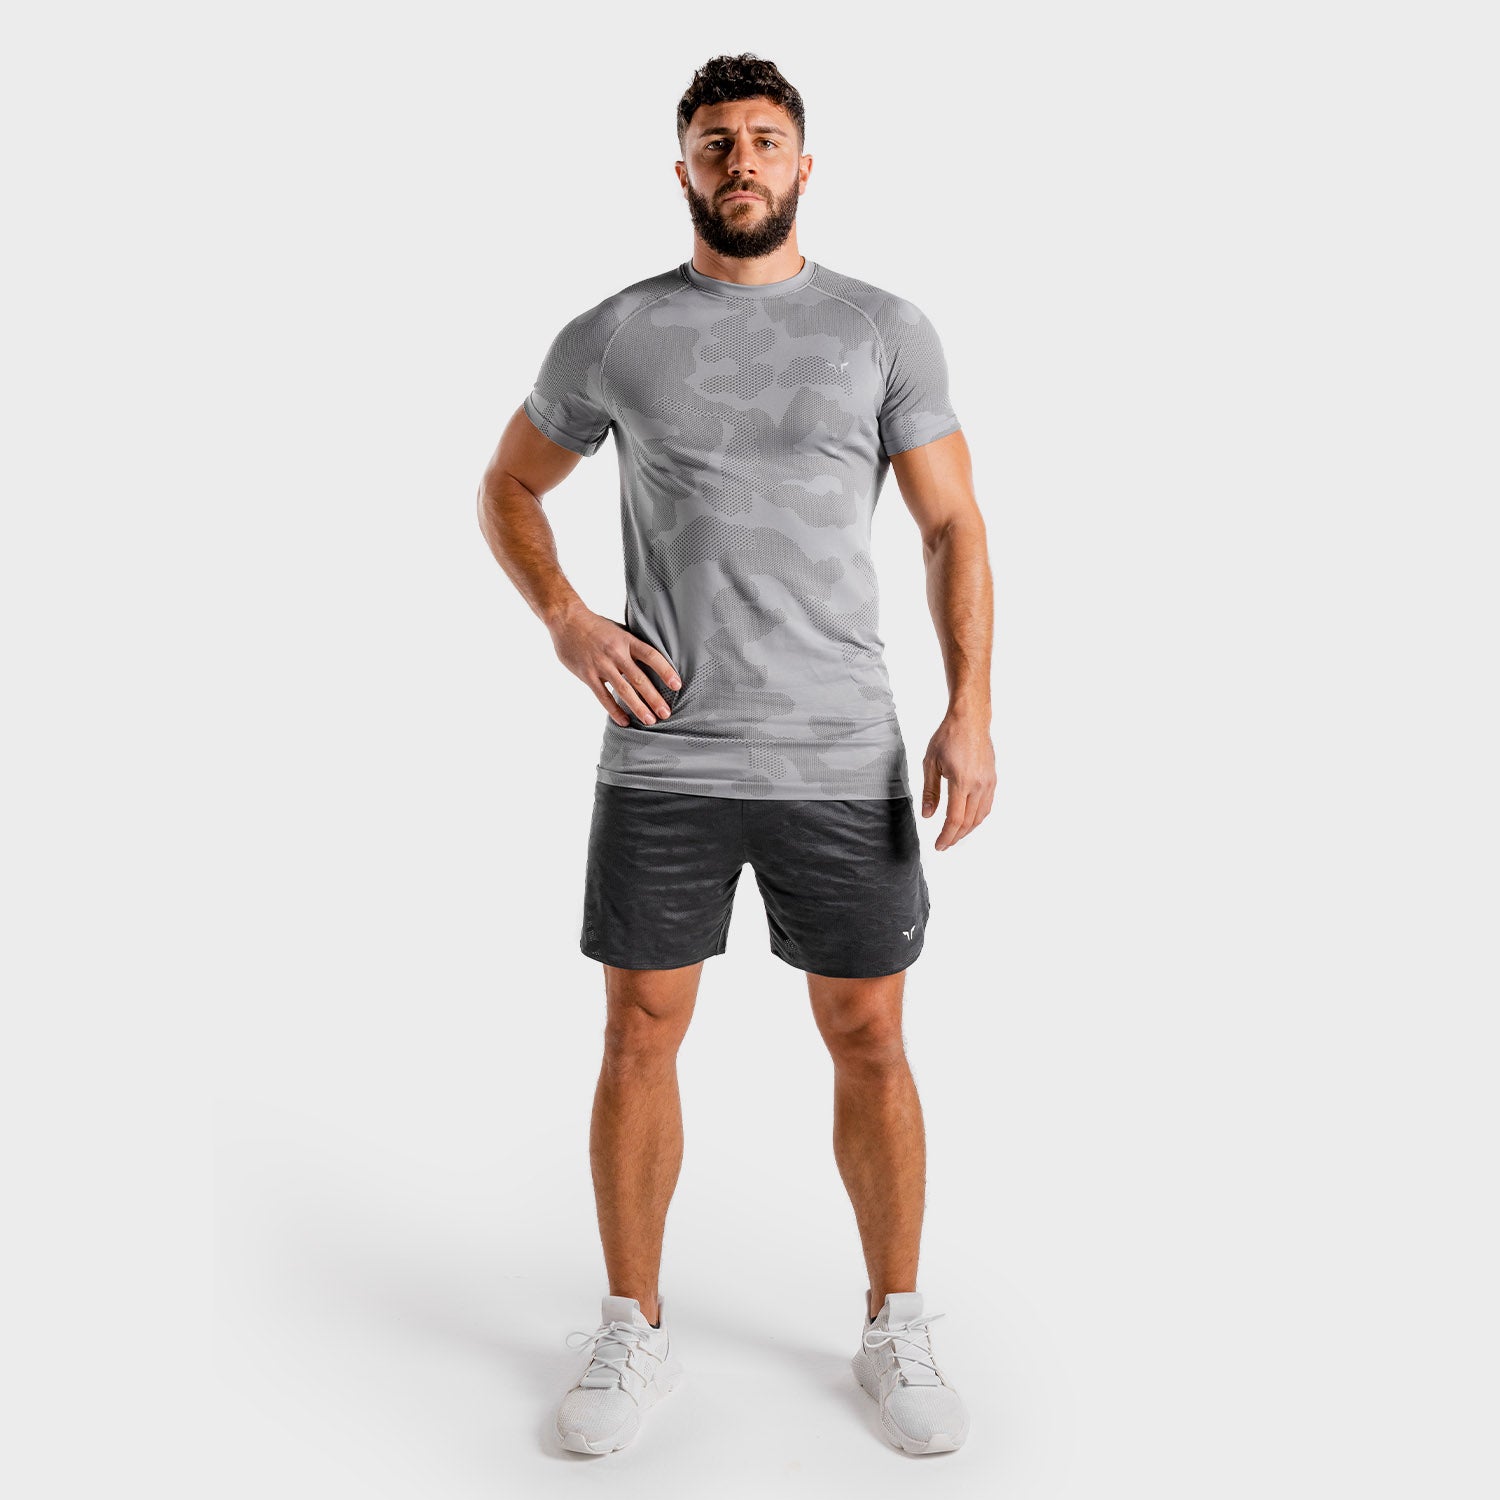 squatwolf-workout-shirts-for-men-wolf-seamless-workout-tee-grey-gym-wear